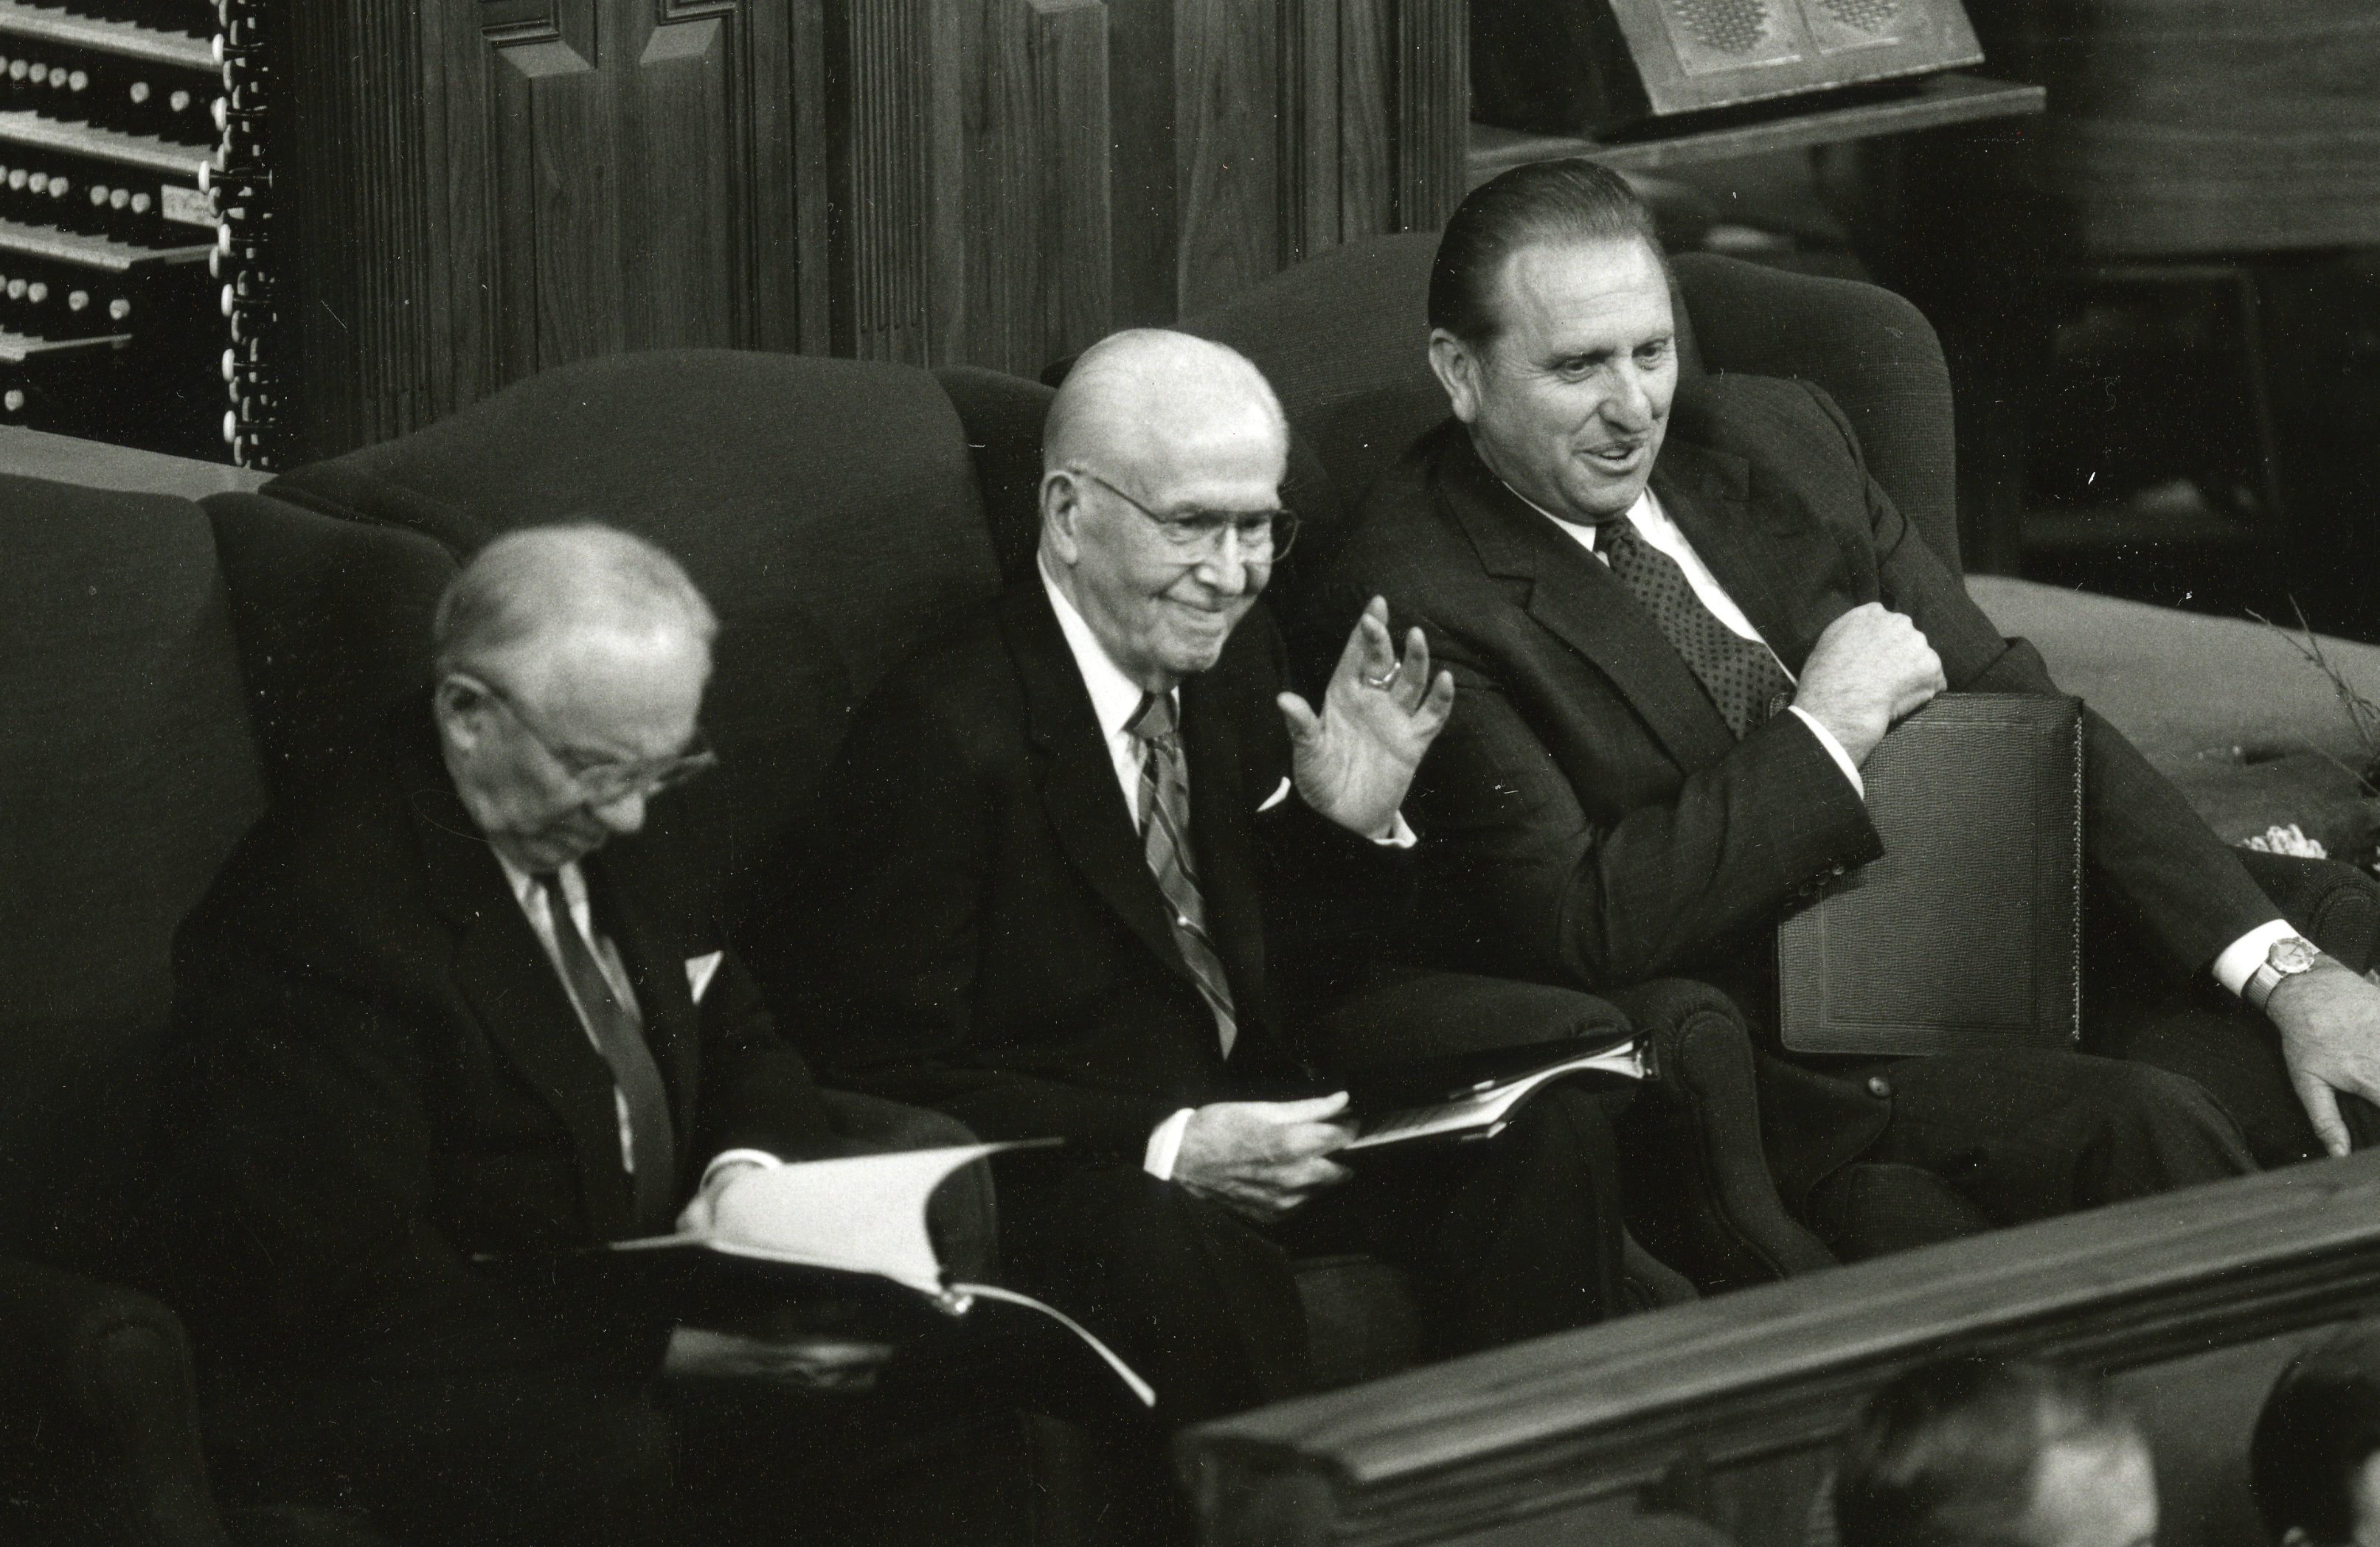 President Benson sitting in a large armchair between his counselors, smiling and waving to the audience in the Tabernacle.